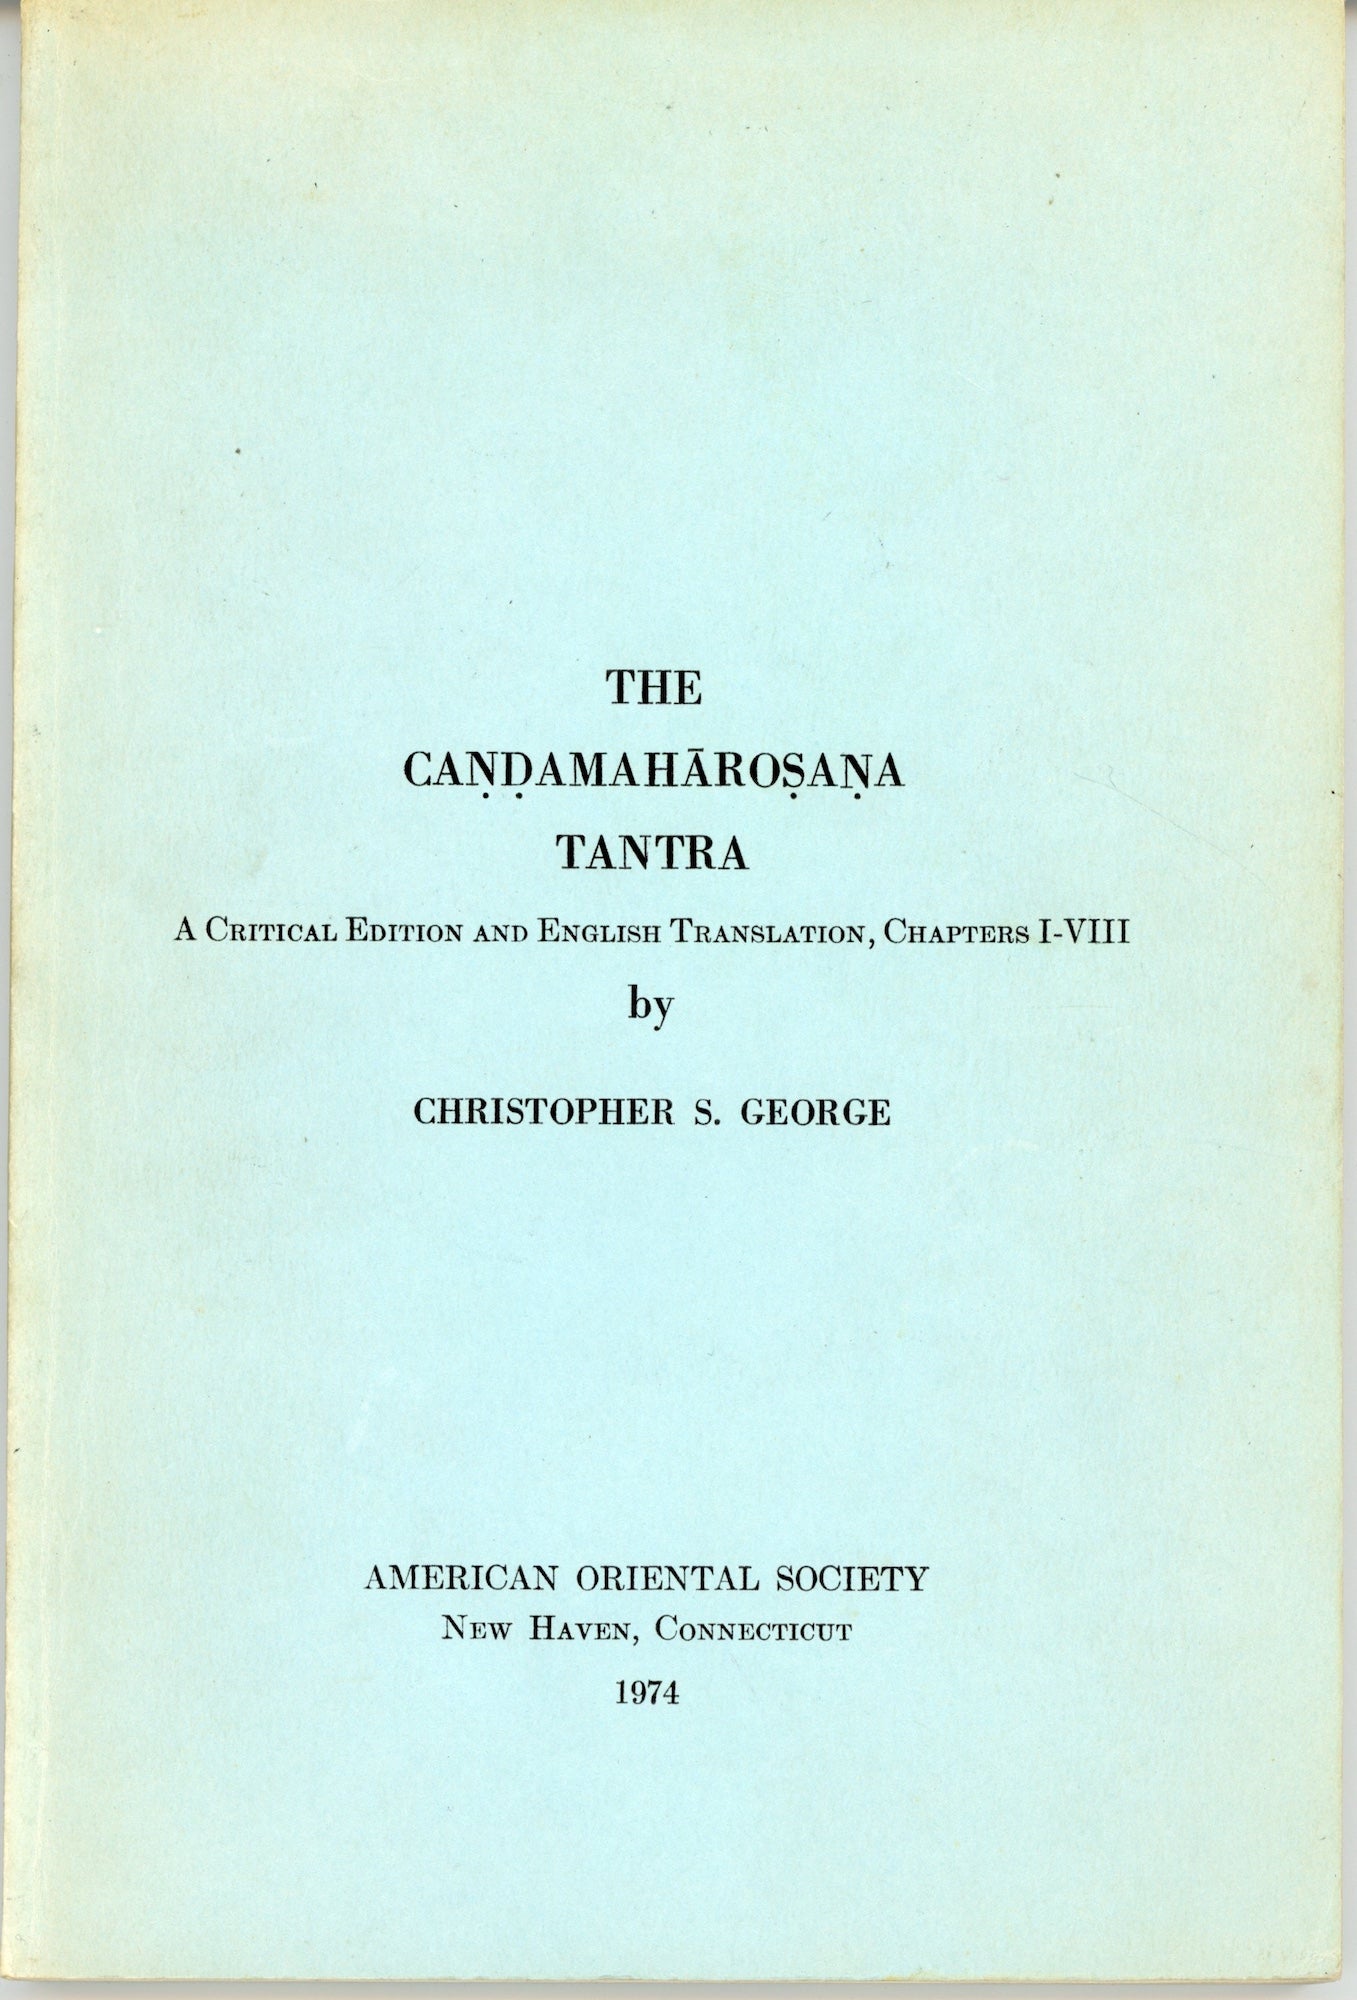 George, Christopher S., ed - The Ca Amah Ro a a Tantra, Chapters I-VIII. A Critical Edition and English Translation. American Oriental Series (Vol. 56)